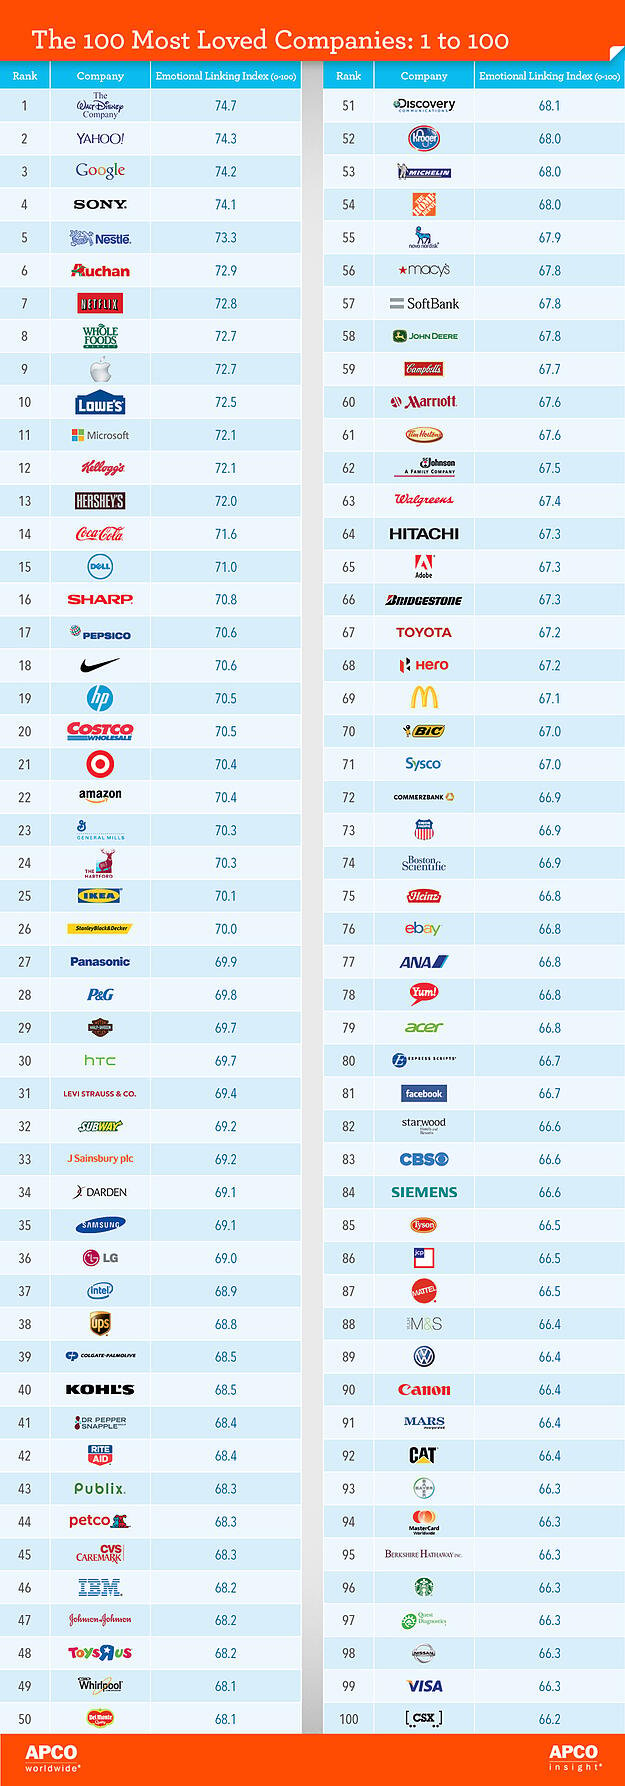 The 100 Most Loved Companies in the World